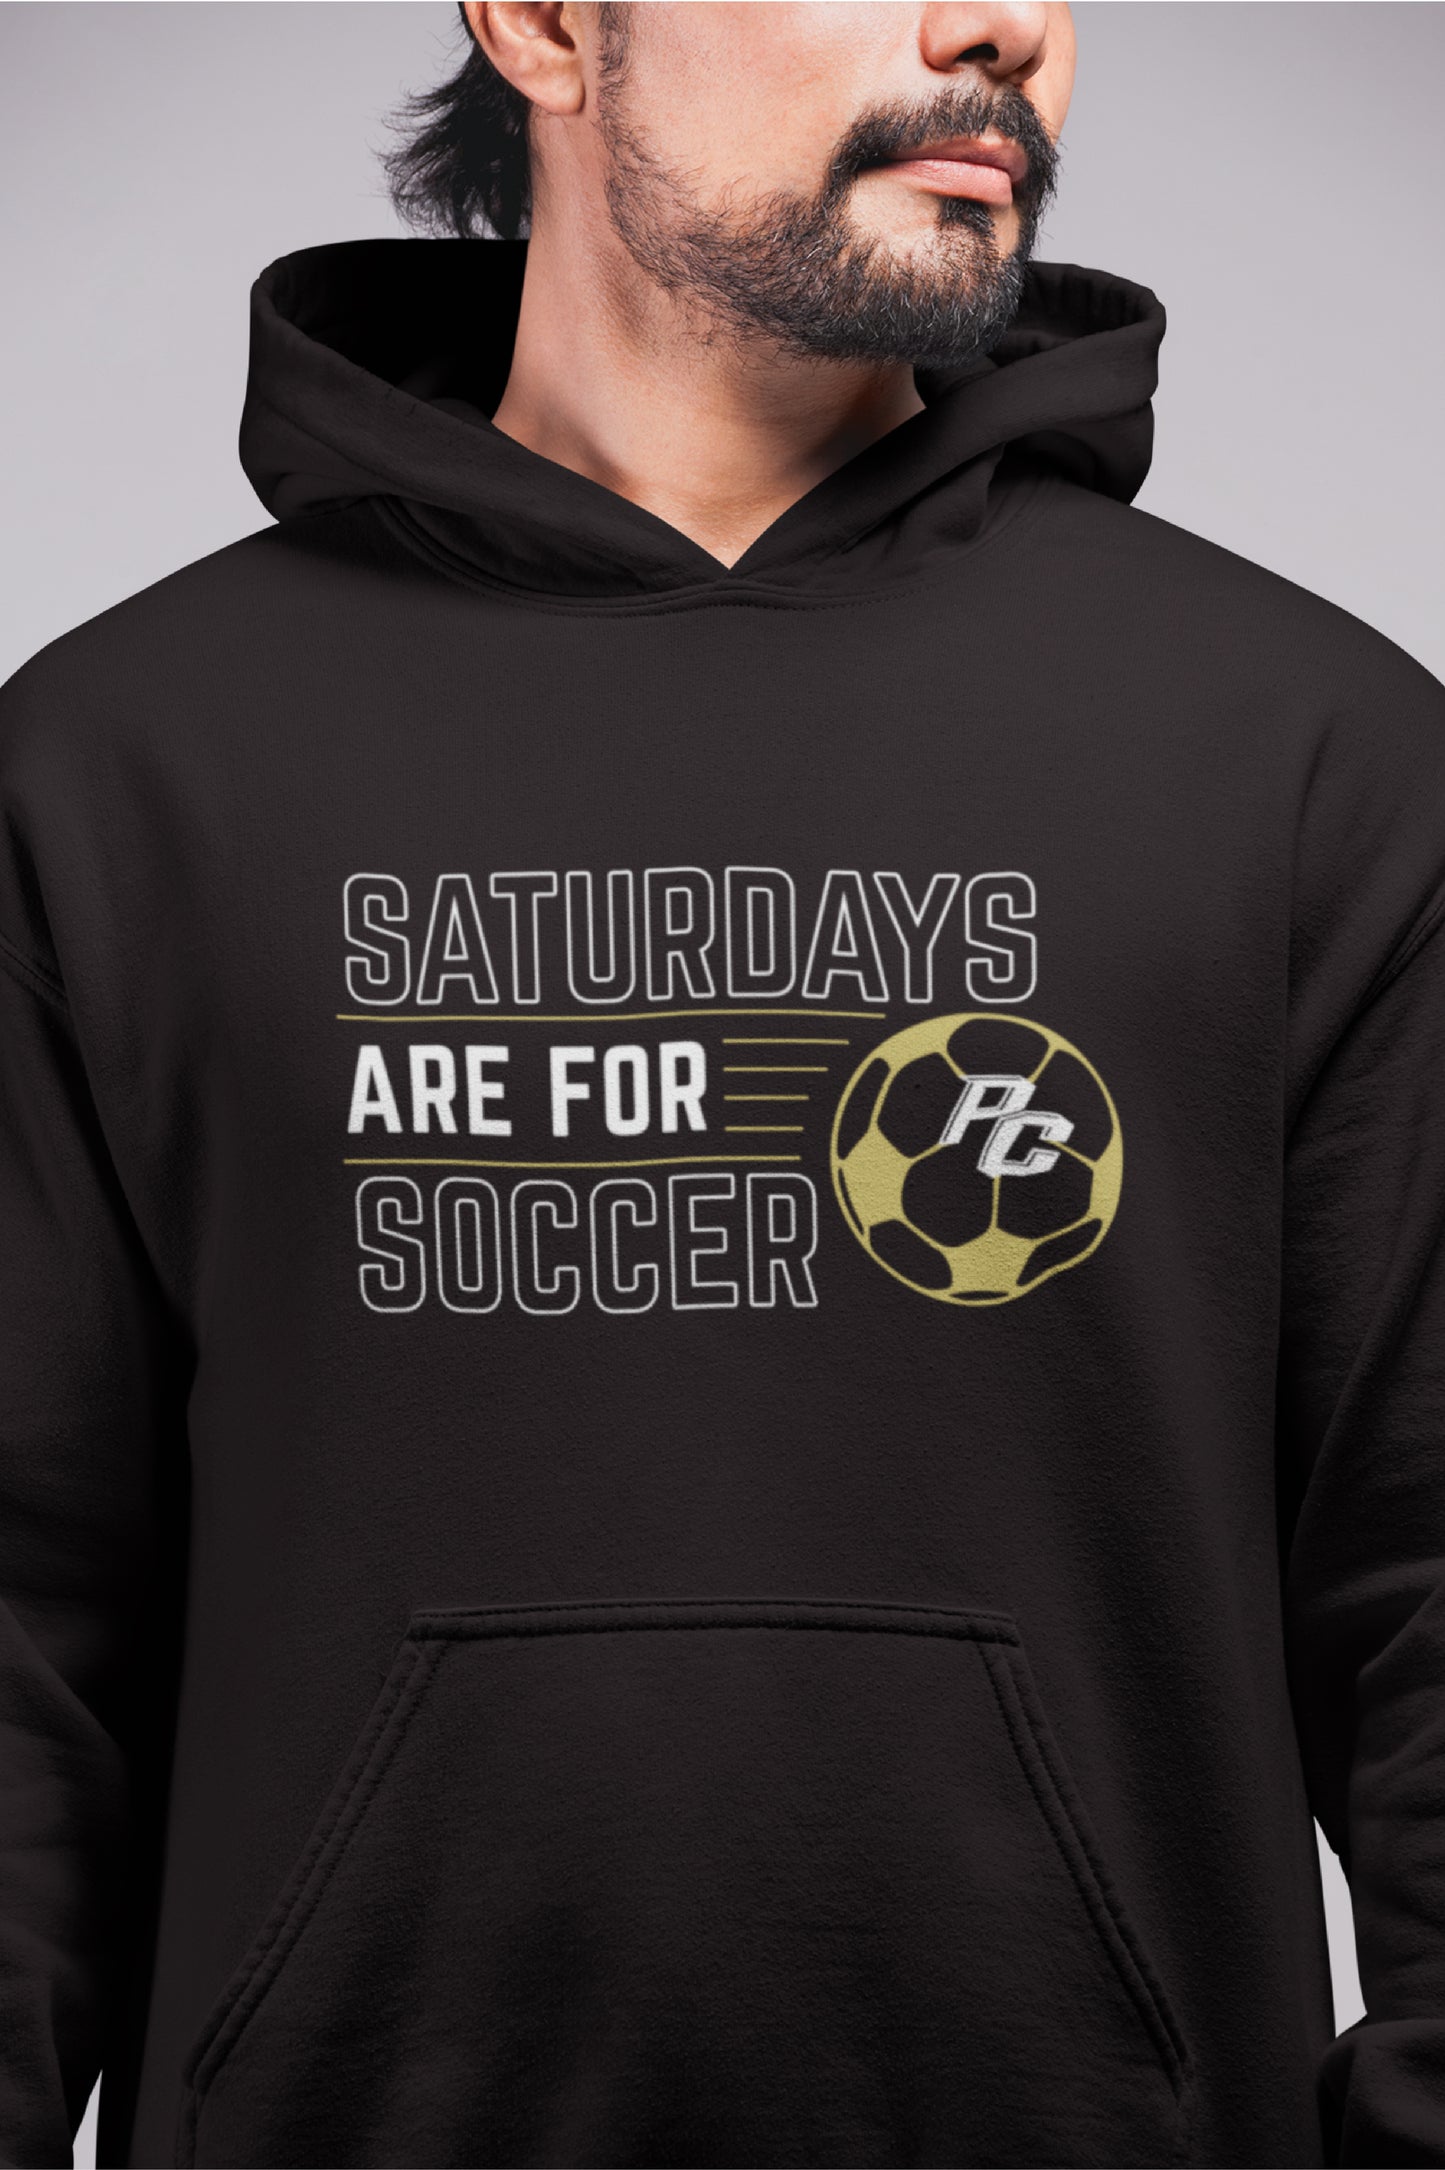 Saturdays Are For Soccer - Hoodie (Black)